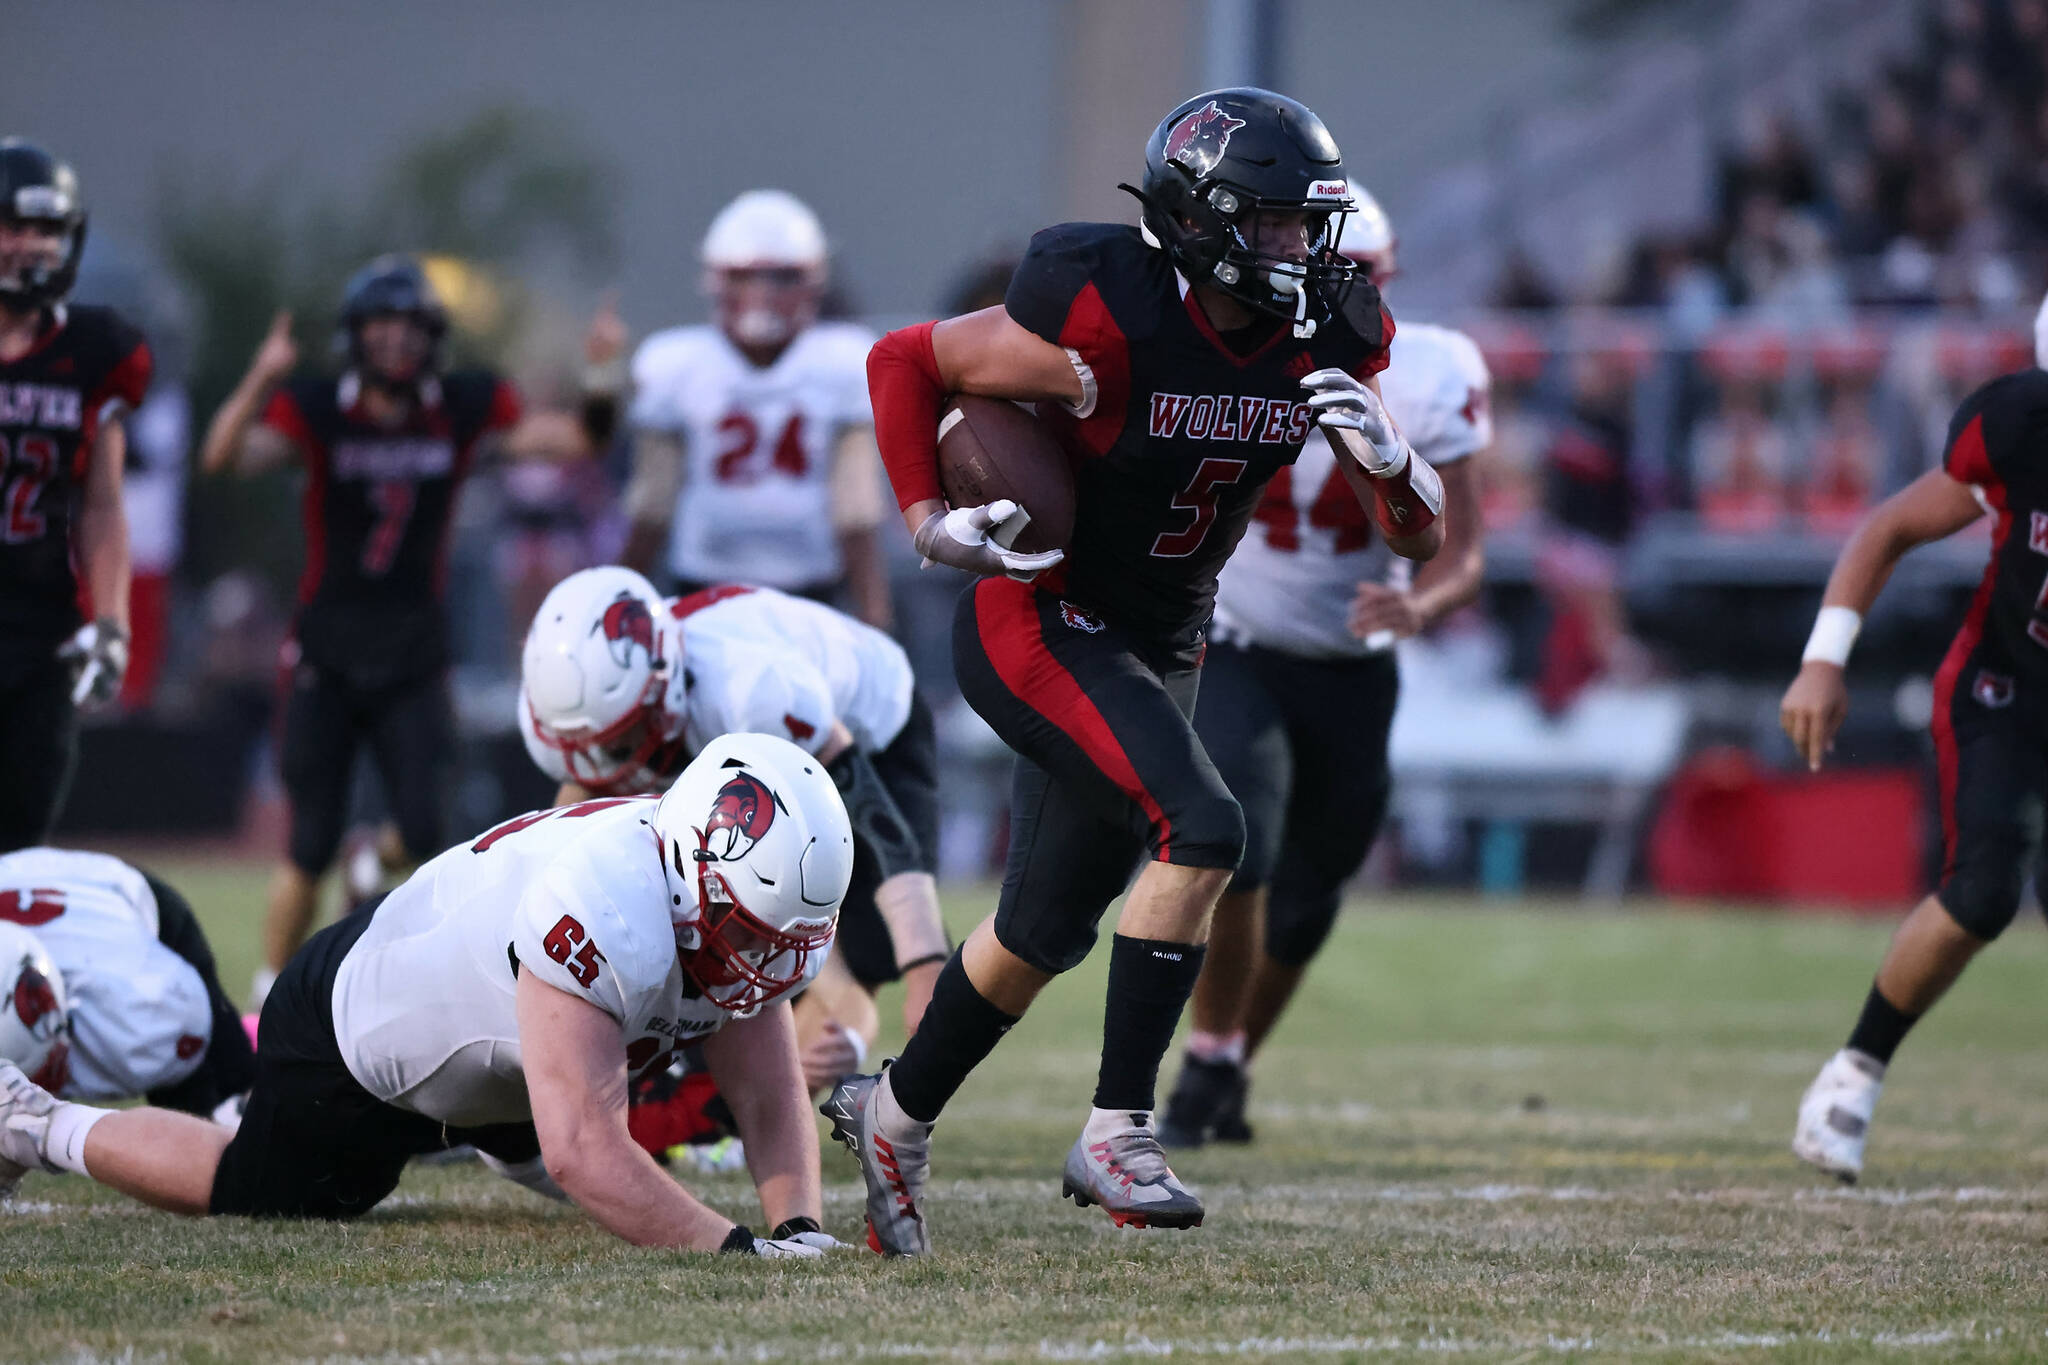 Photo by John Fisken
Dominic Coffman of the Coupeville Wolves during Thursday’s game. Coupeville High School’s varsity football team defeated Bellingham 48-6.